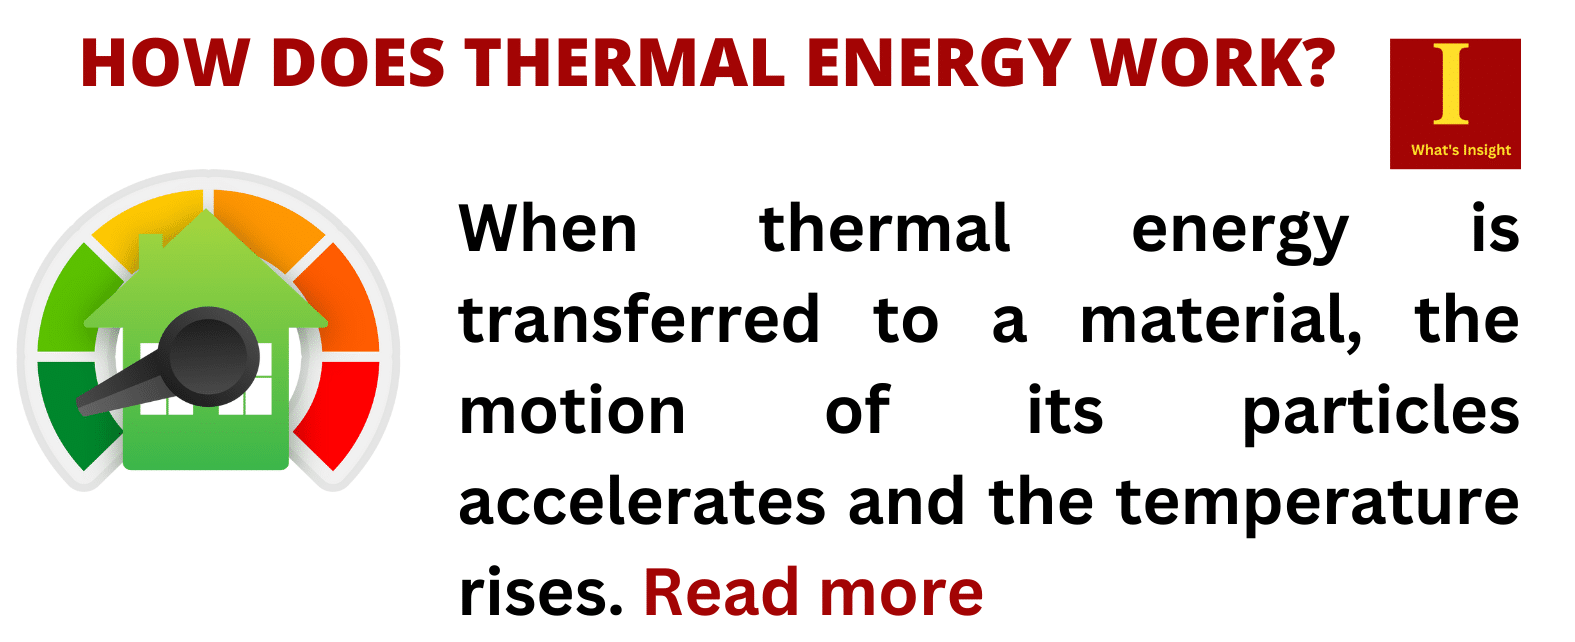 how-does-thermmal-energy-work